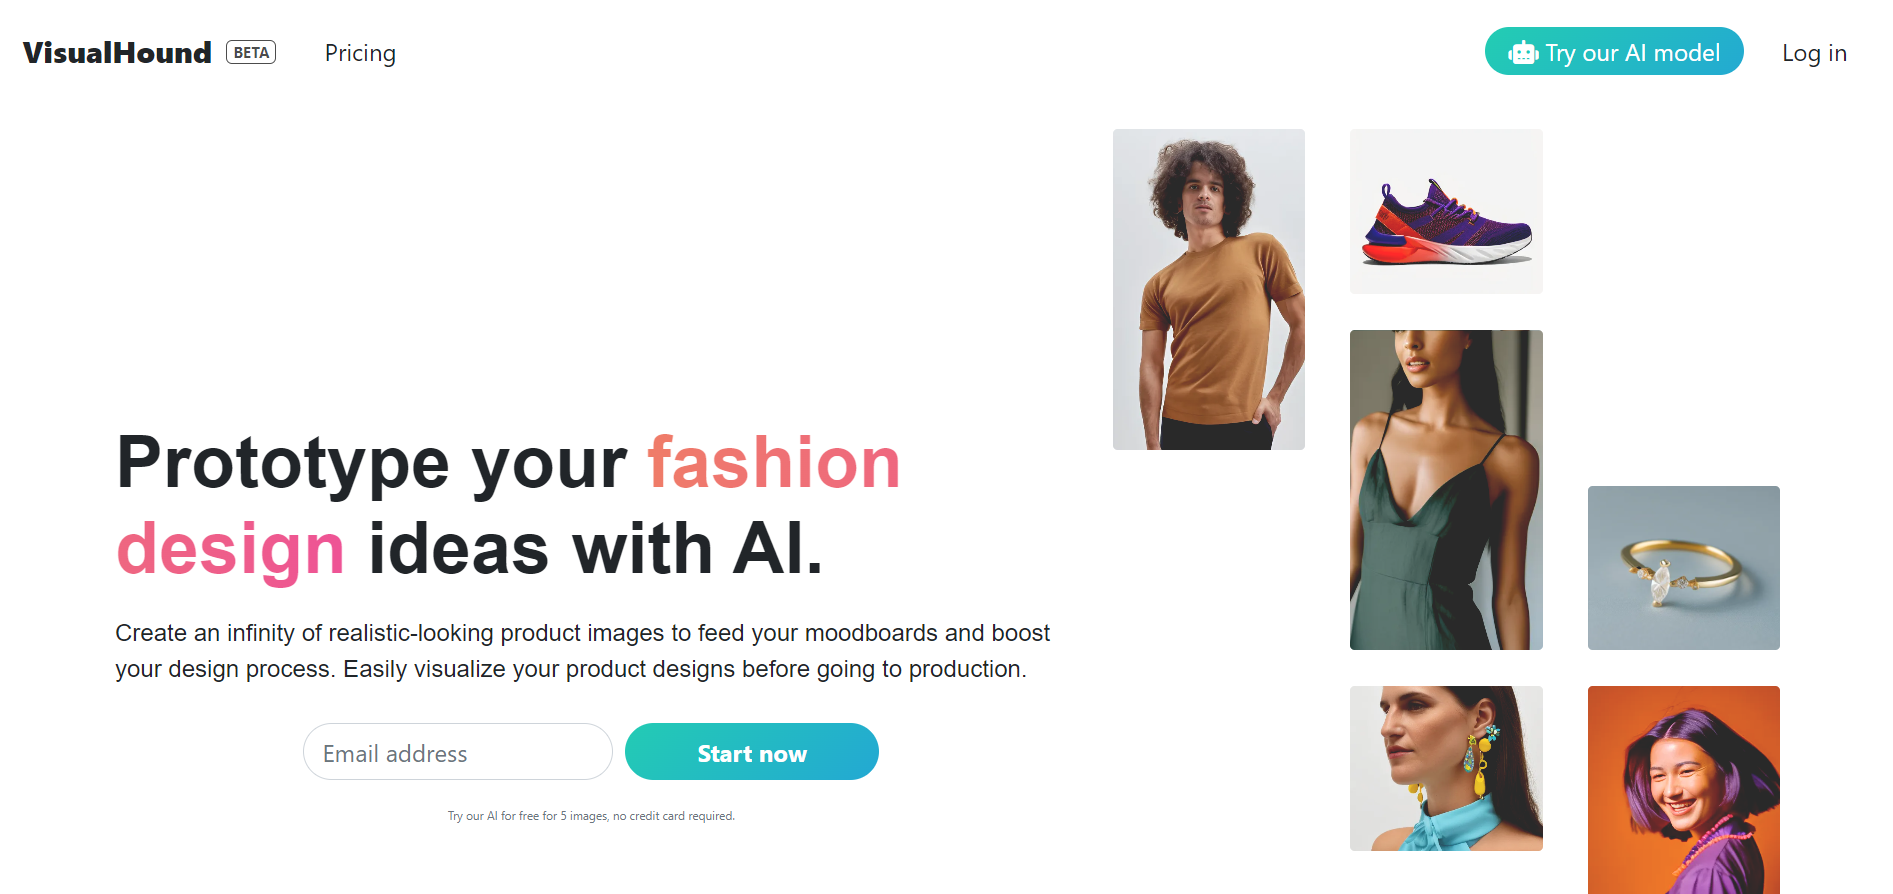 Unlock Your Fashion Design Potential with Visualhound.com’s AI-Powered Prototyping Tools!